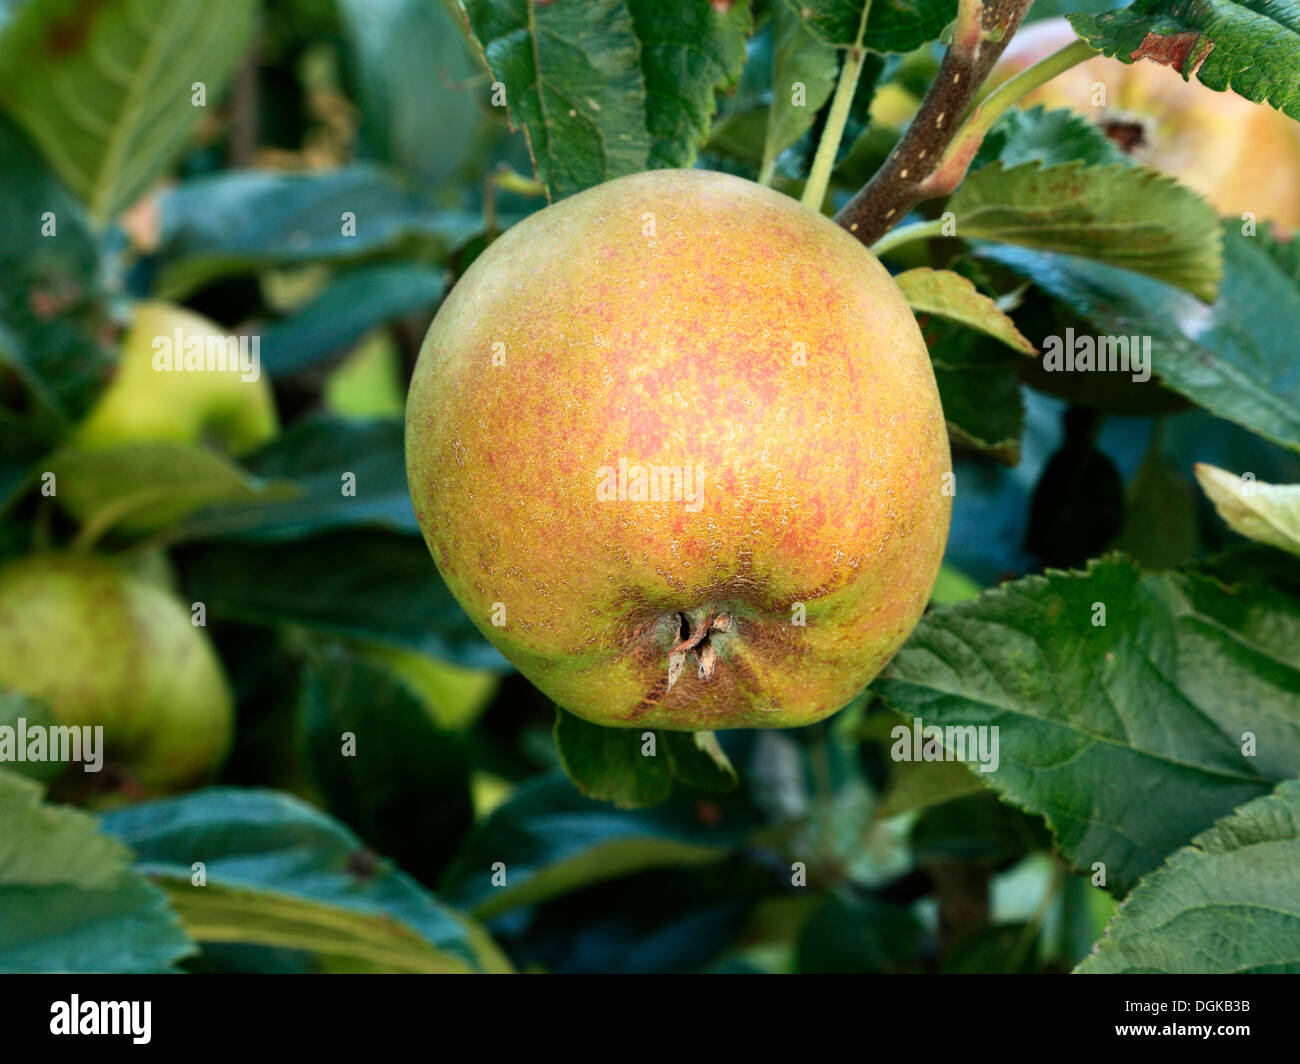 Apple 'D'Arcy Spice', malus domestica, apples, named variety varieties growing on tree Stock Photo